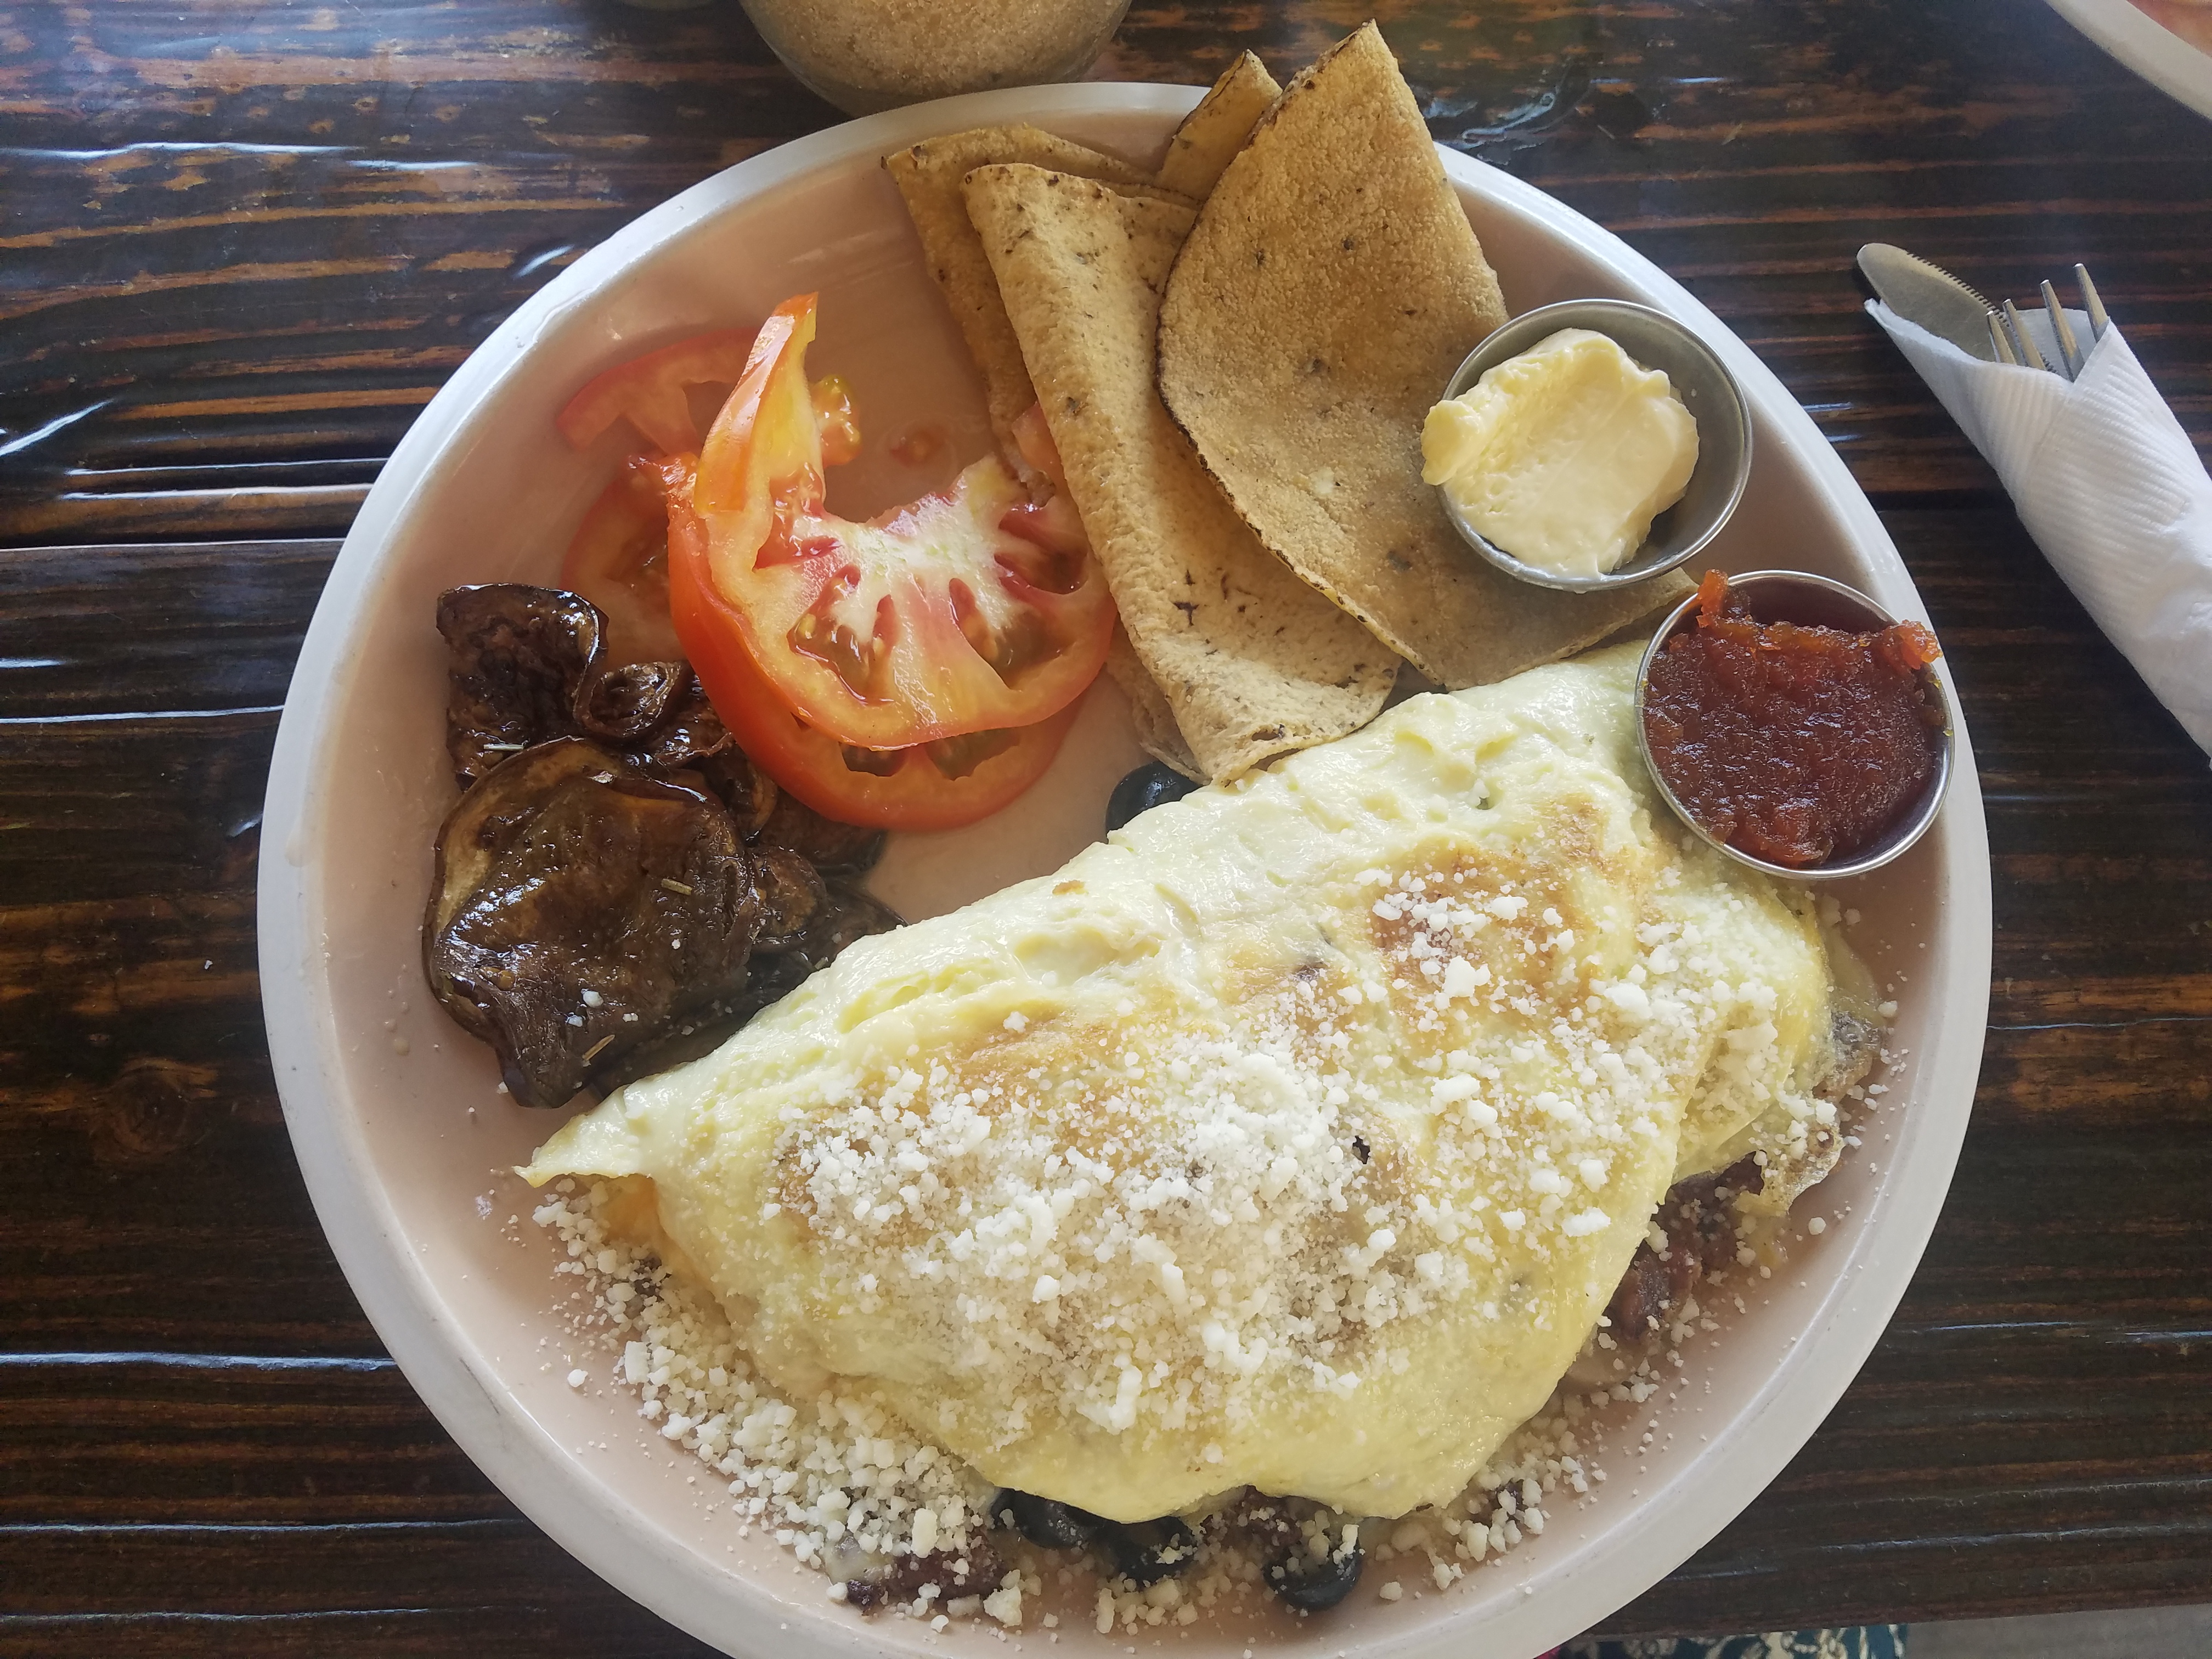 Her favorite breakfast in Belize. Sarah Staples of Staples Fitness lives the life she teaches, eating for nutrition, energy, and healthy weight.